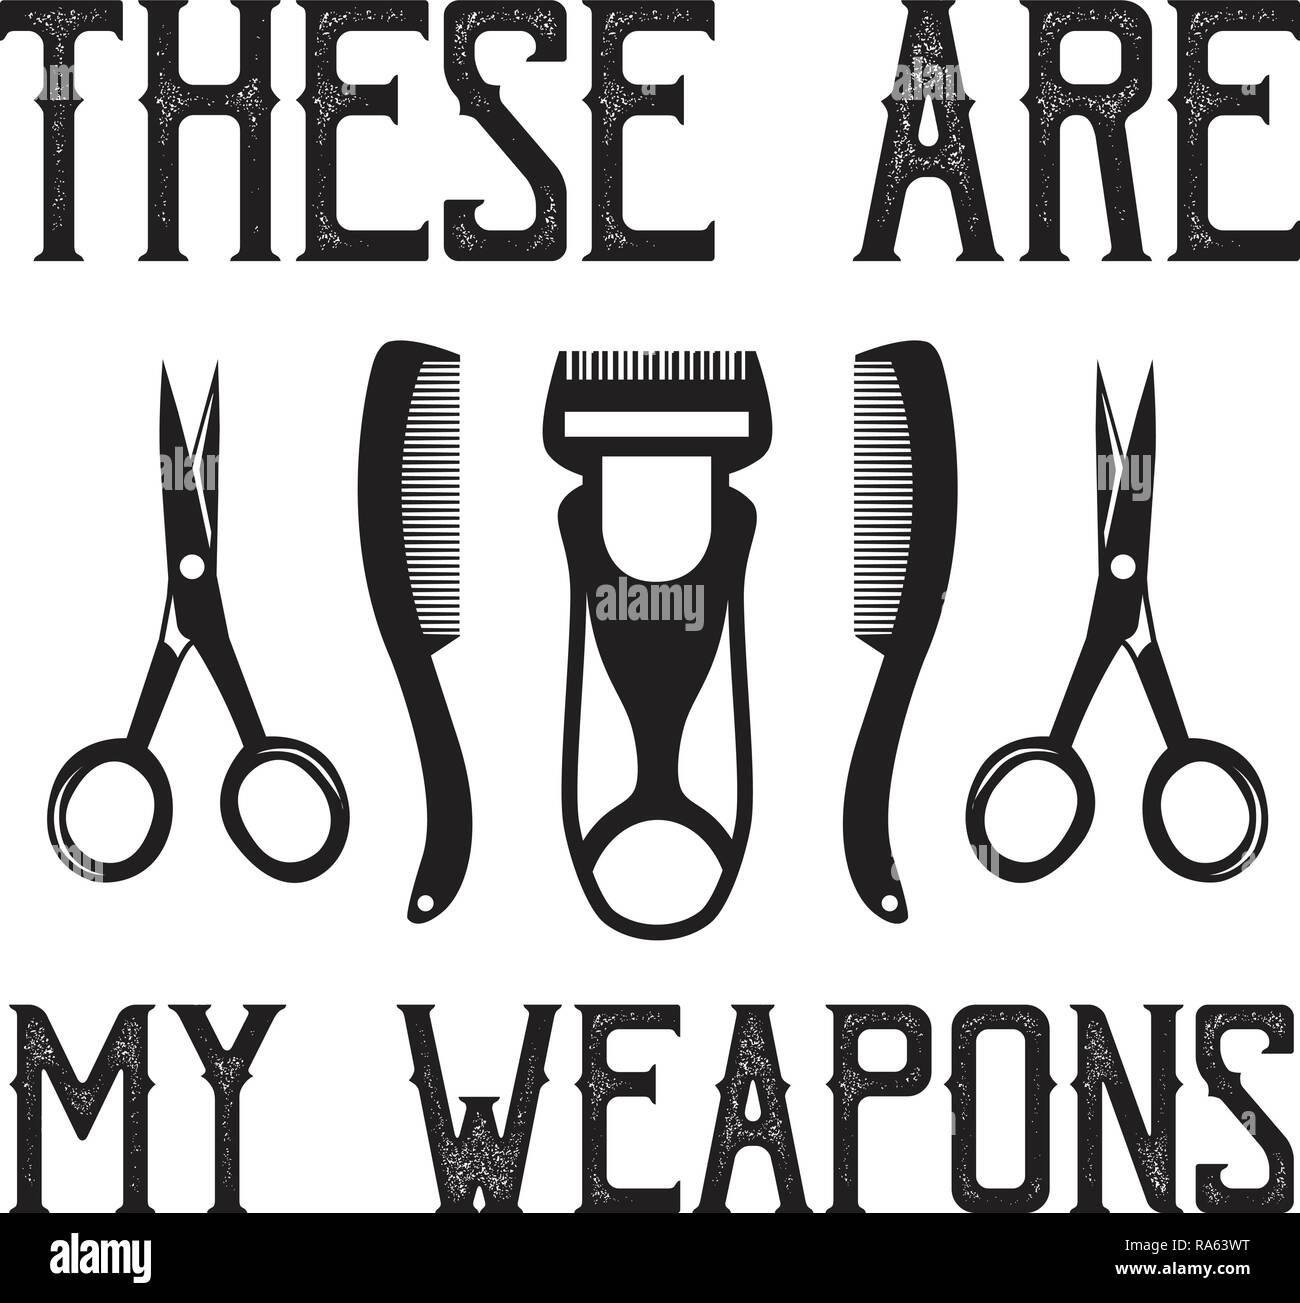 martodesigns - These Are My Weapons hairstylist tools black